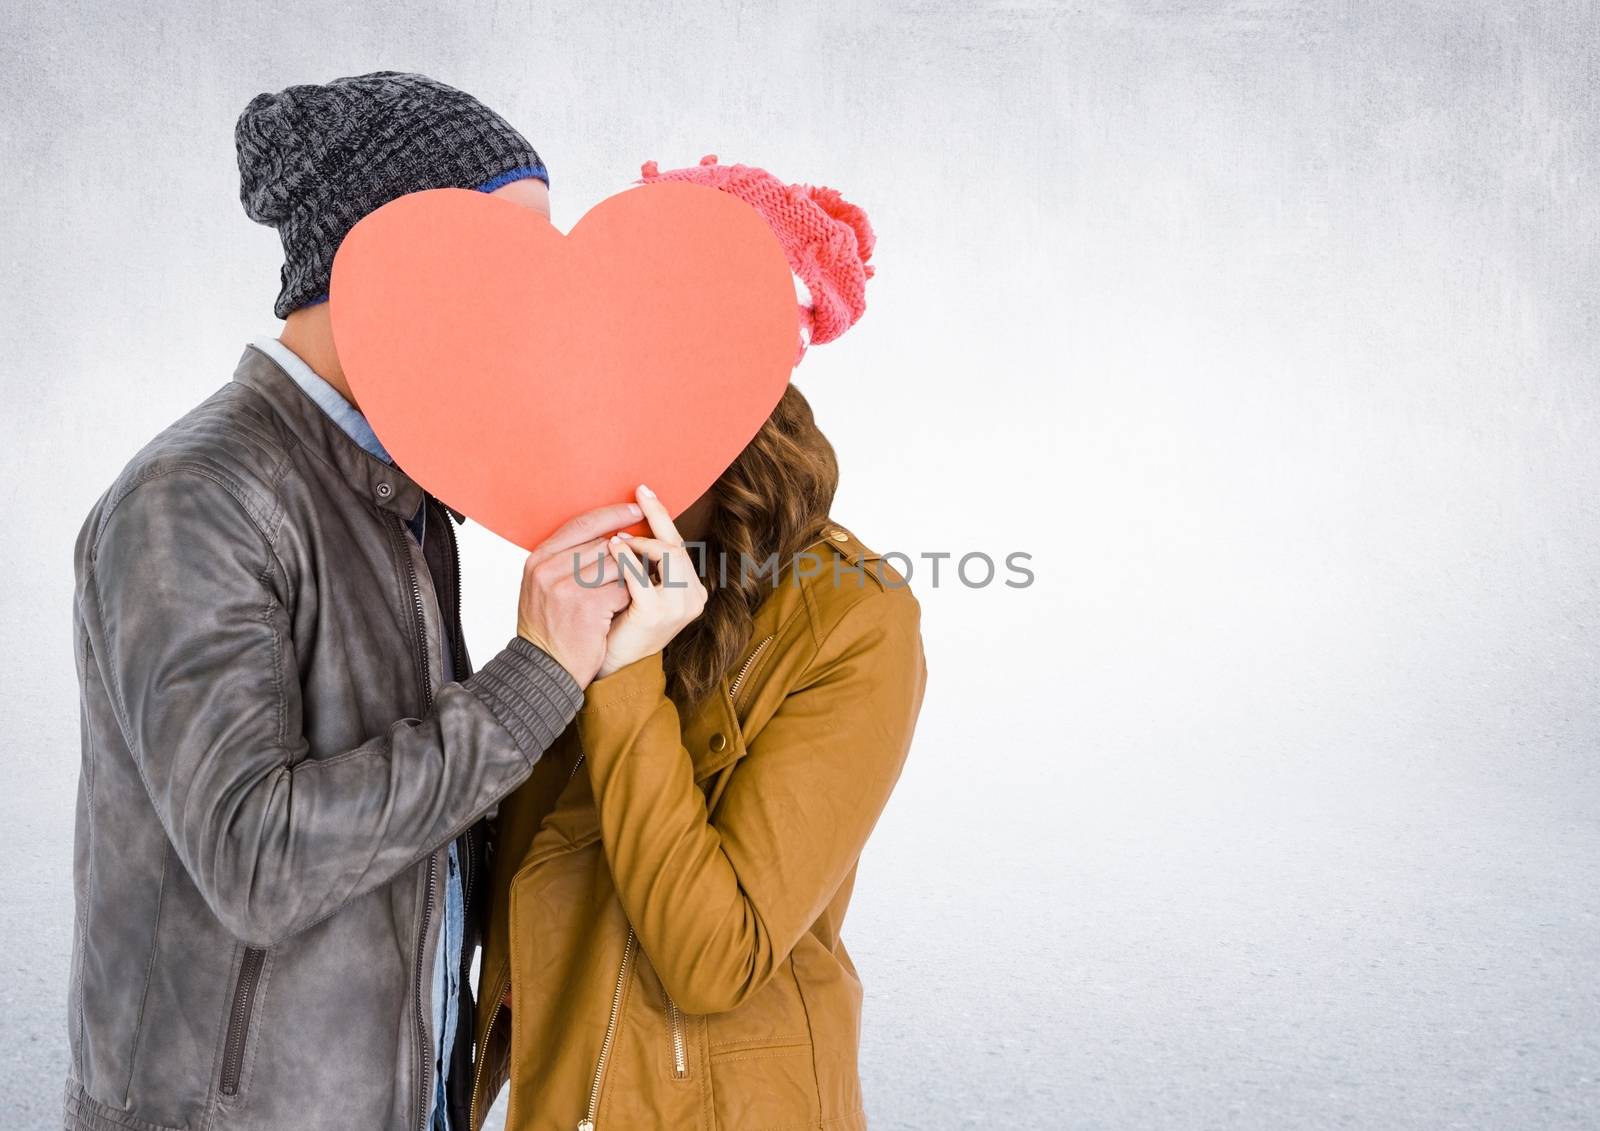 Romantic couple holding heart shape and kissing each other against white background